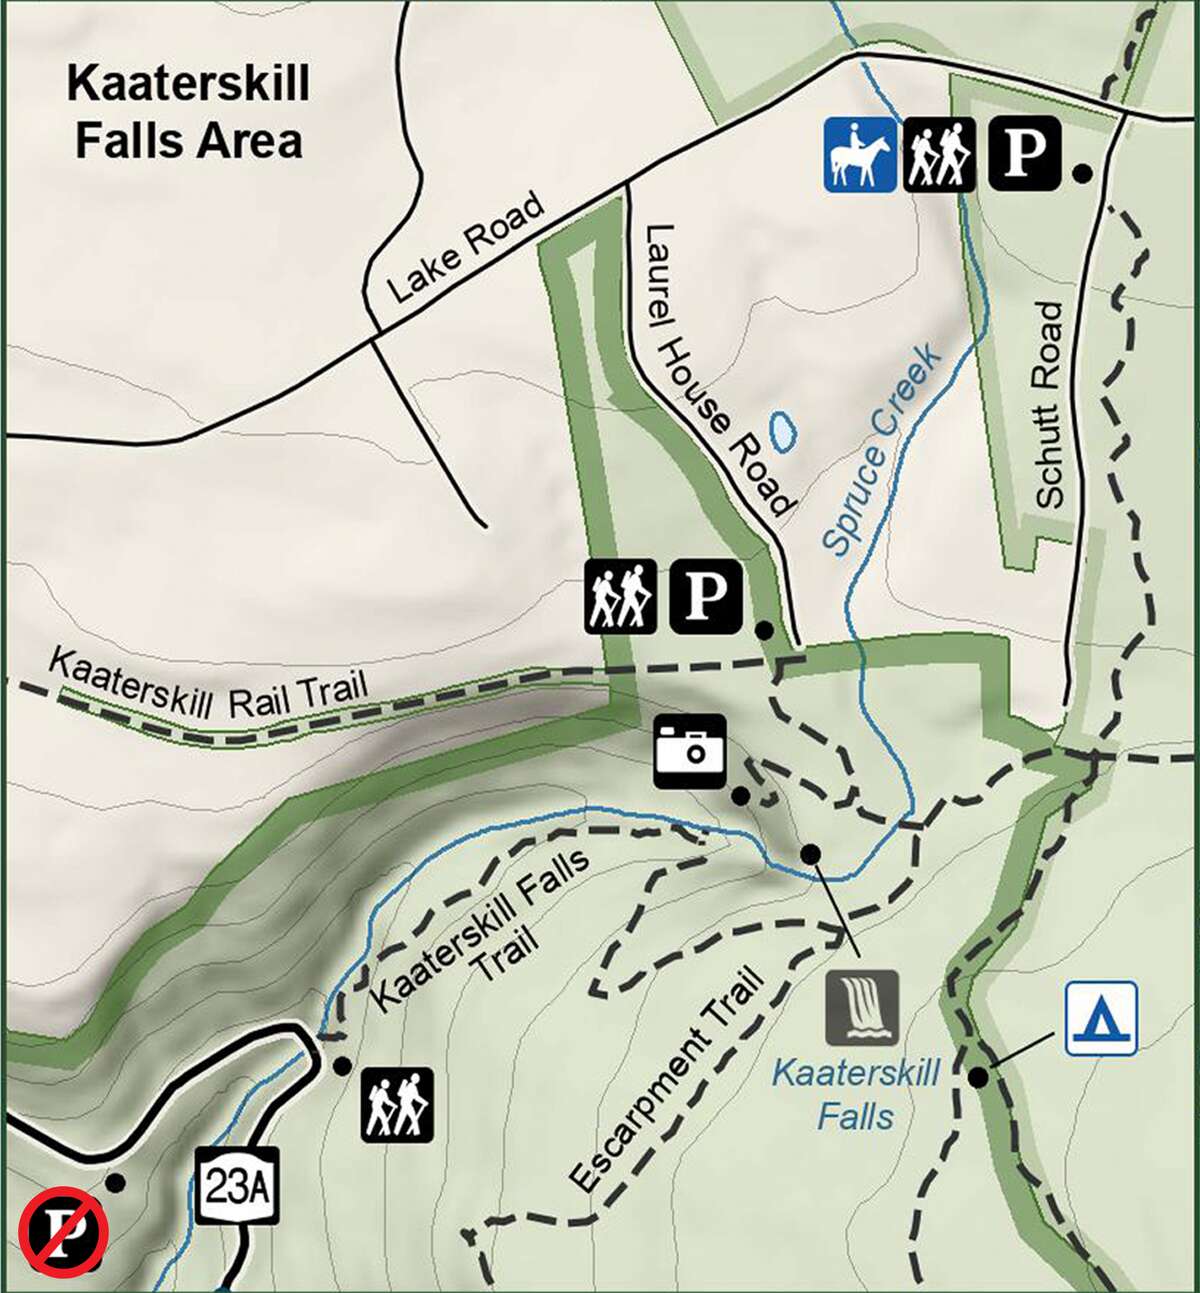 Two parking lots offer trail access Kaaterskill Falls, as well as the North-South Lake Campground. The Molly Smith parking lot (marked in red) is now closed. A pull-off near the trailhead on 23A accommodates a few cars but any illegally parked cars along 23A will be ticketed and towed.